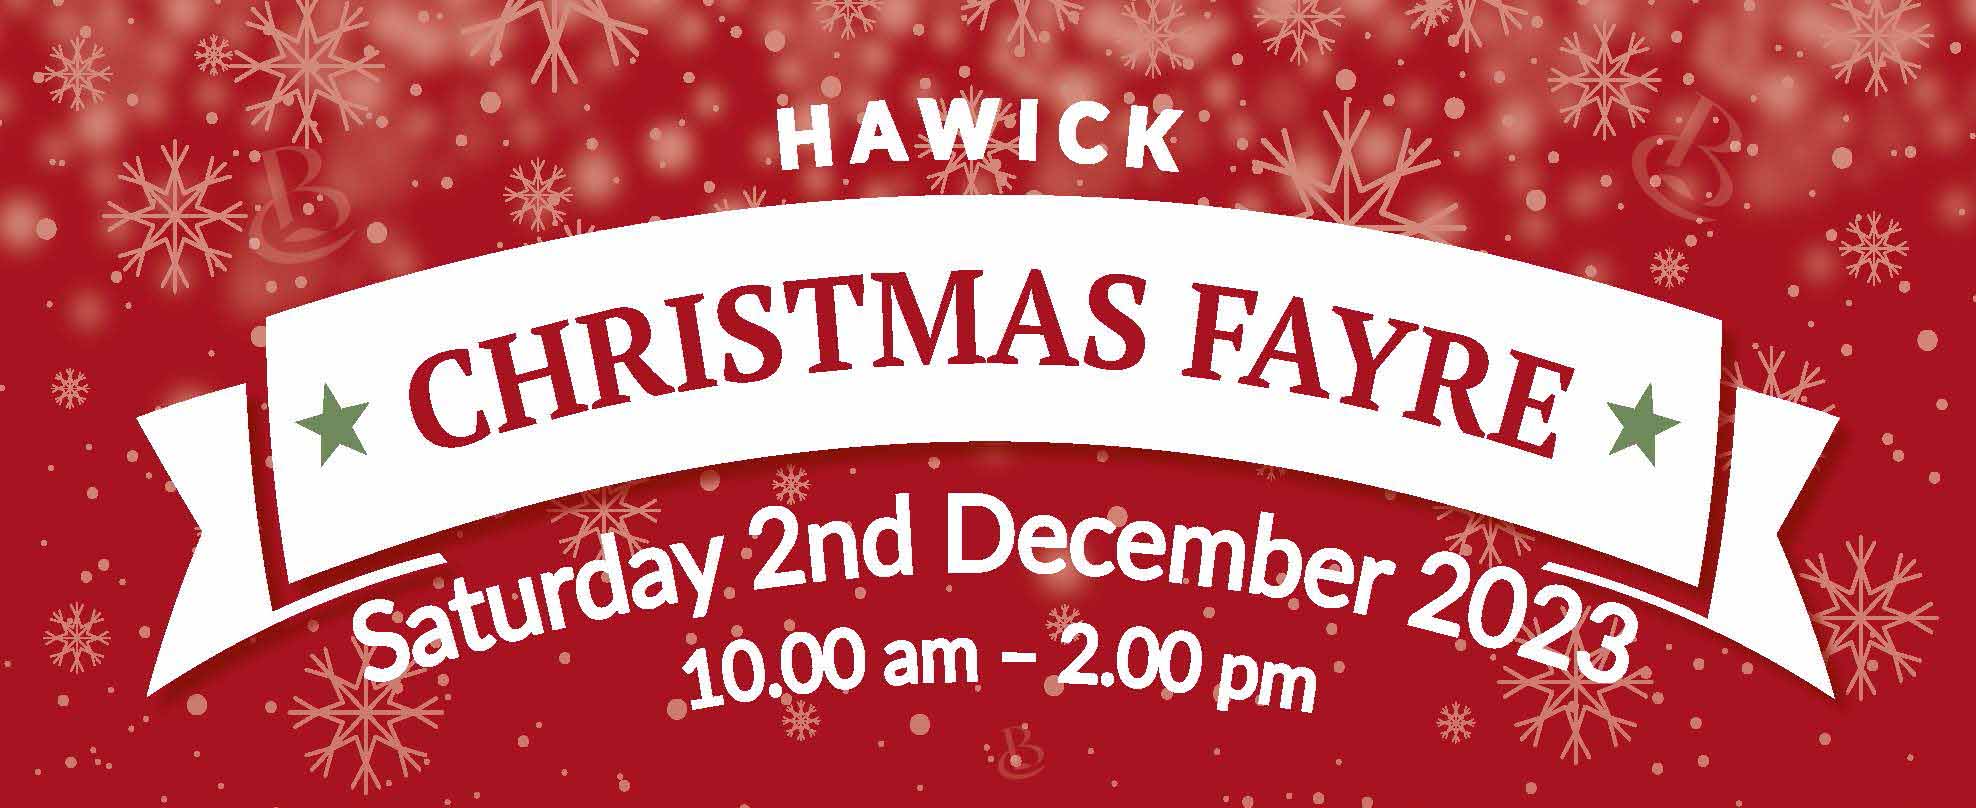 xmas fayre banner with information